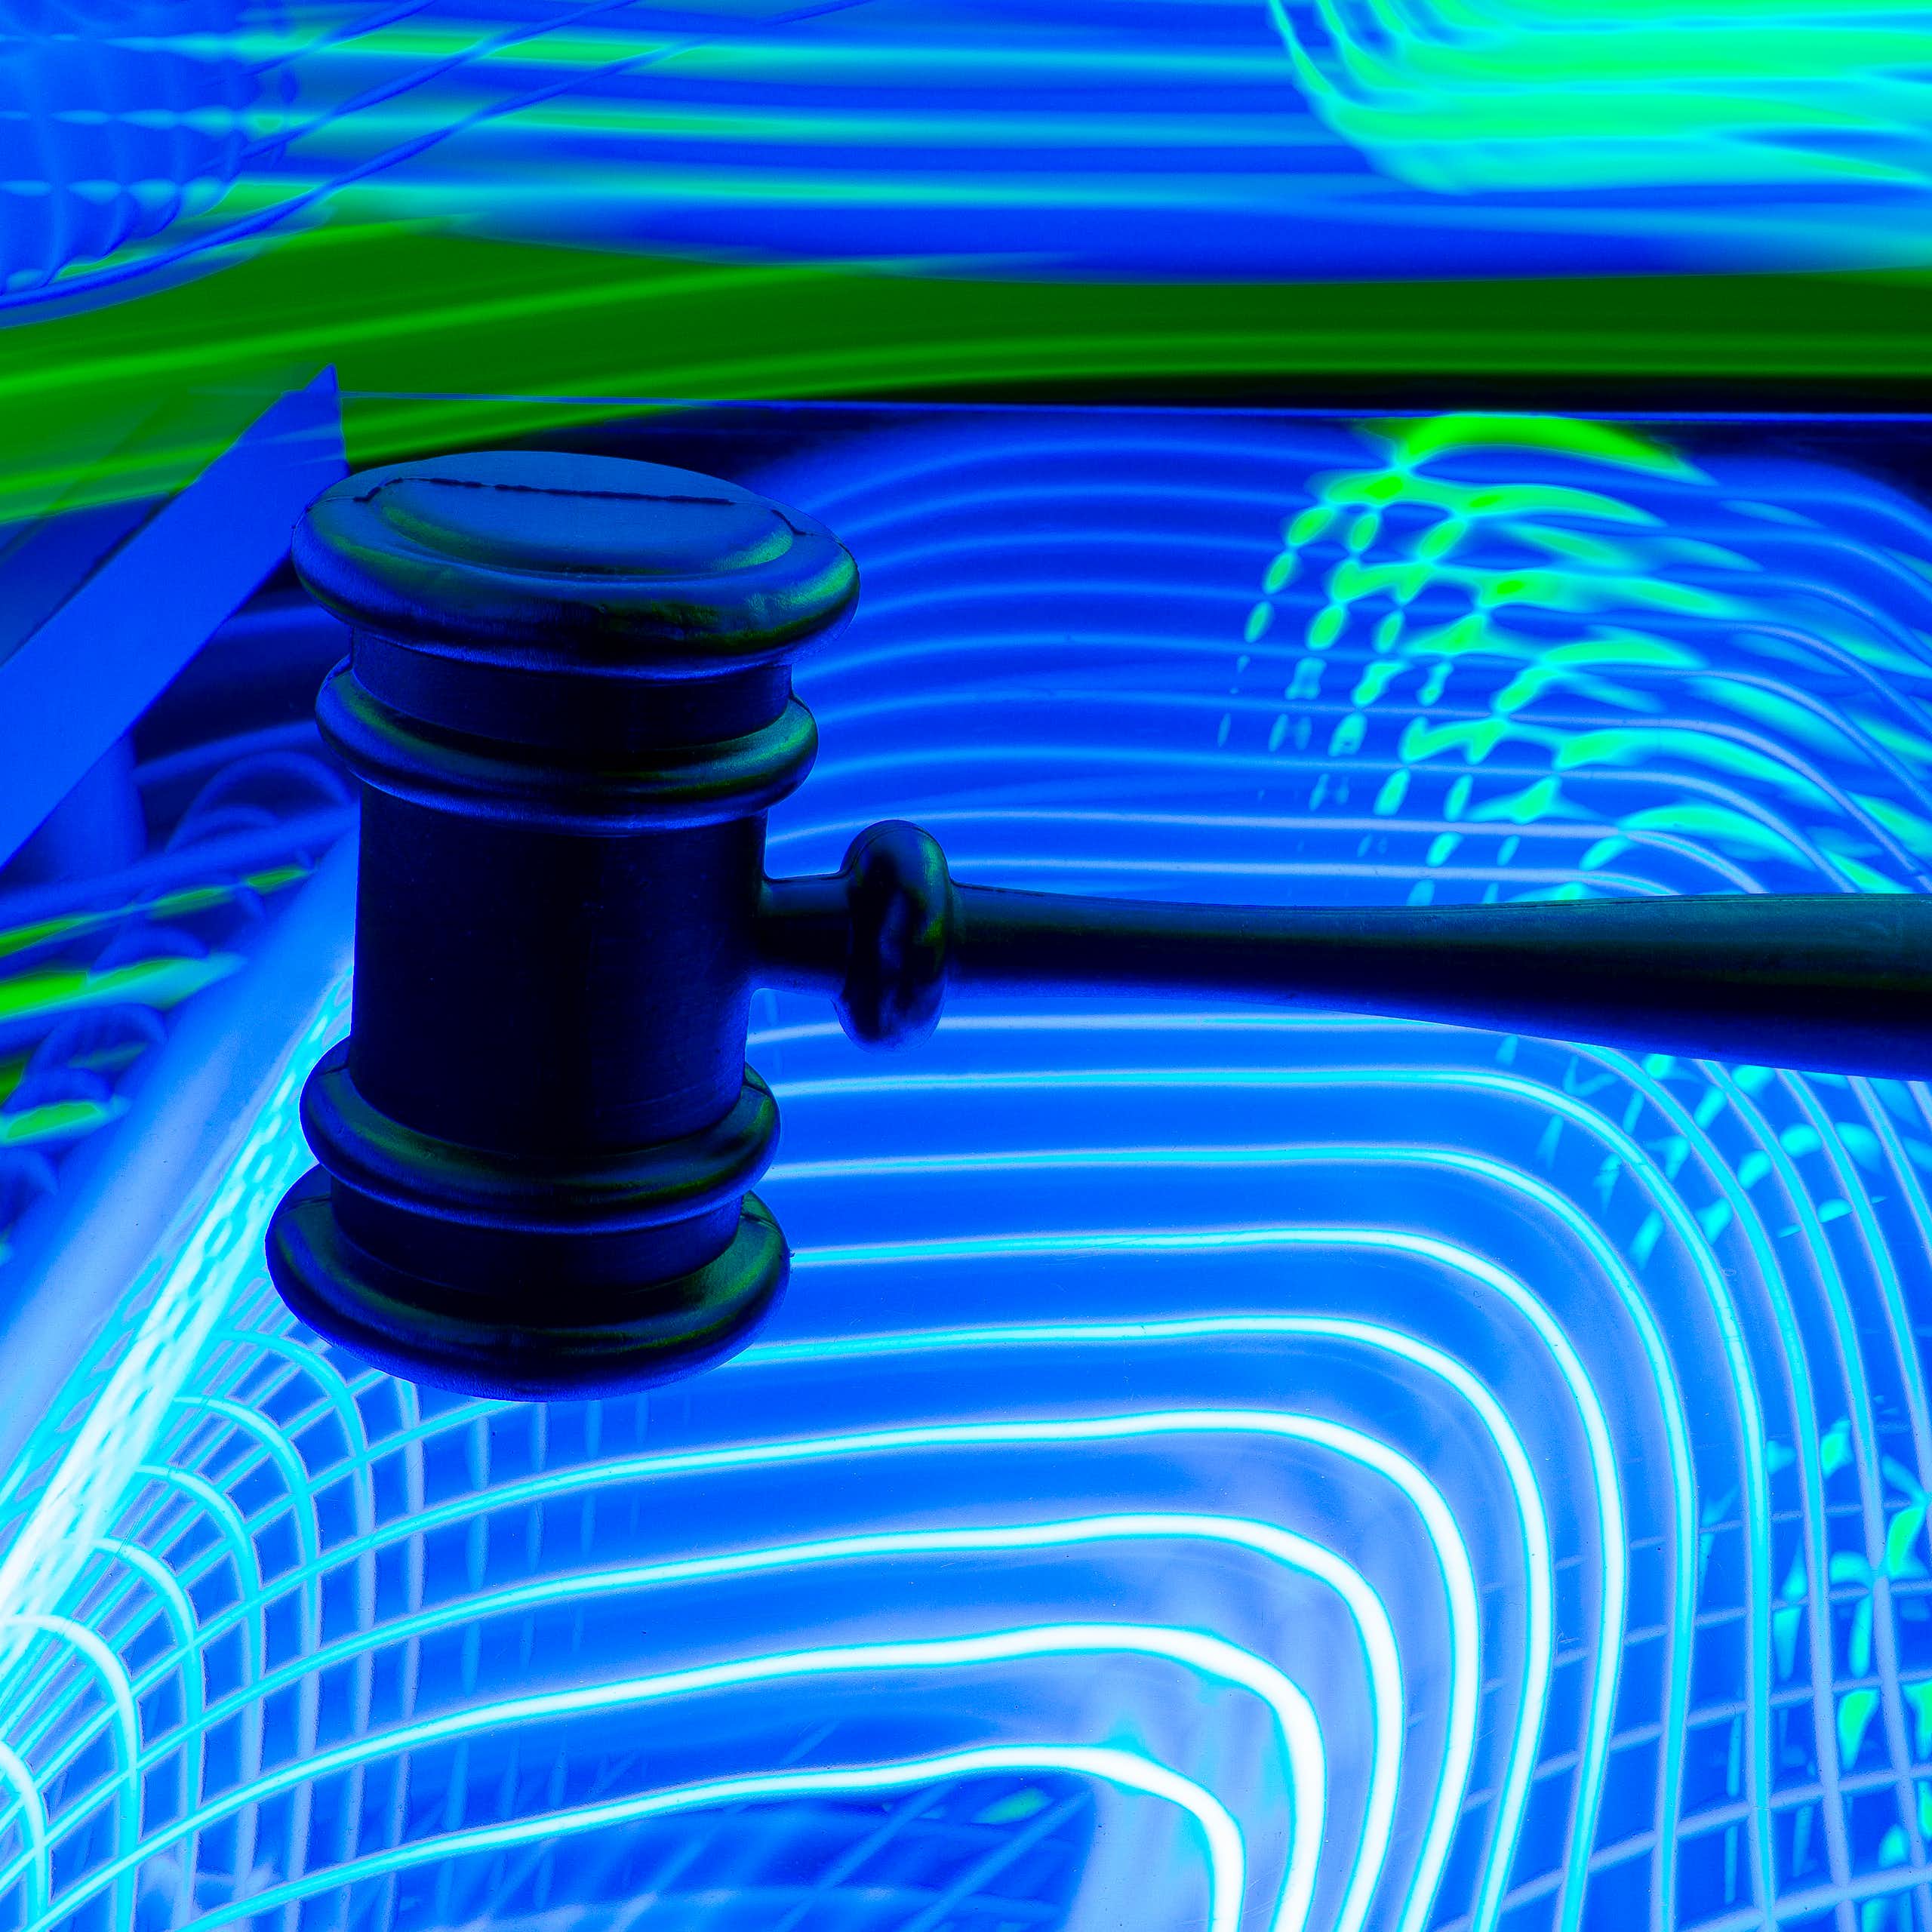 A judge's gavel on a background of neon lights.